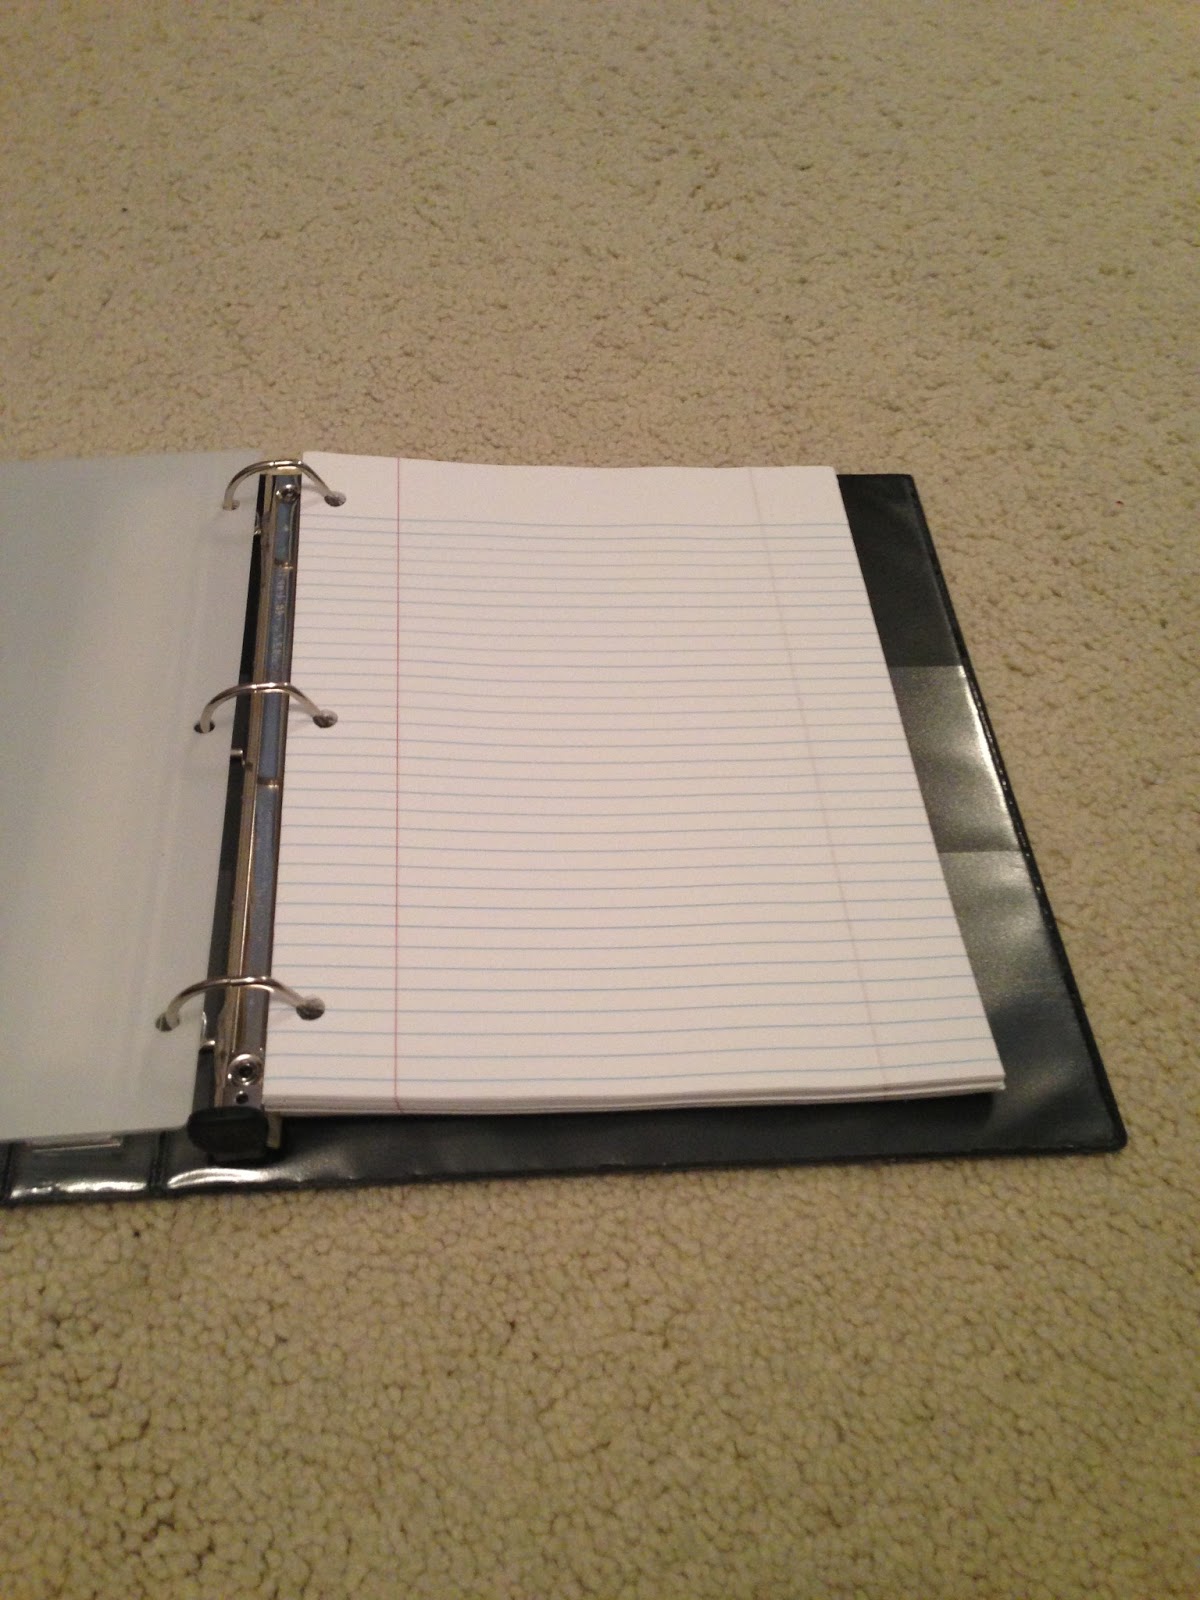 How To Put Paper In A Binder